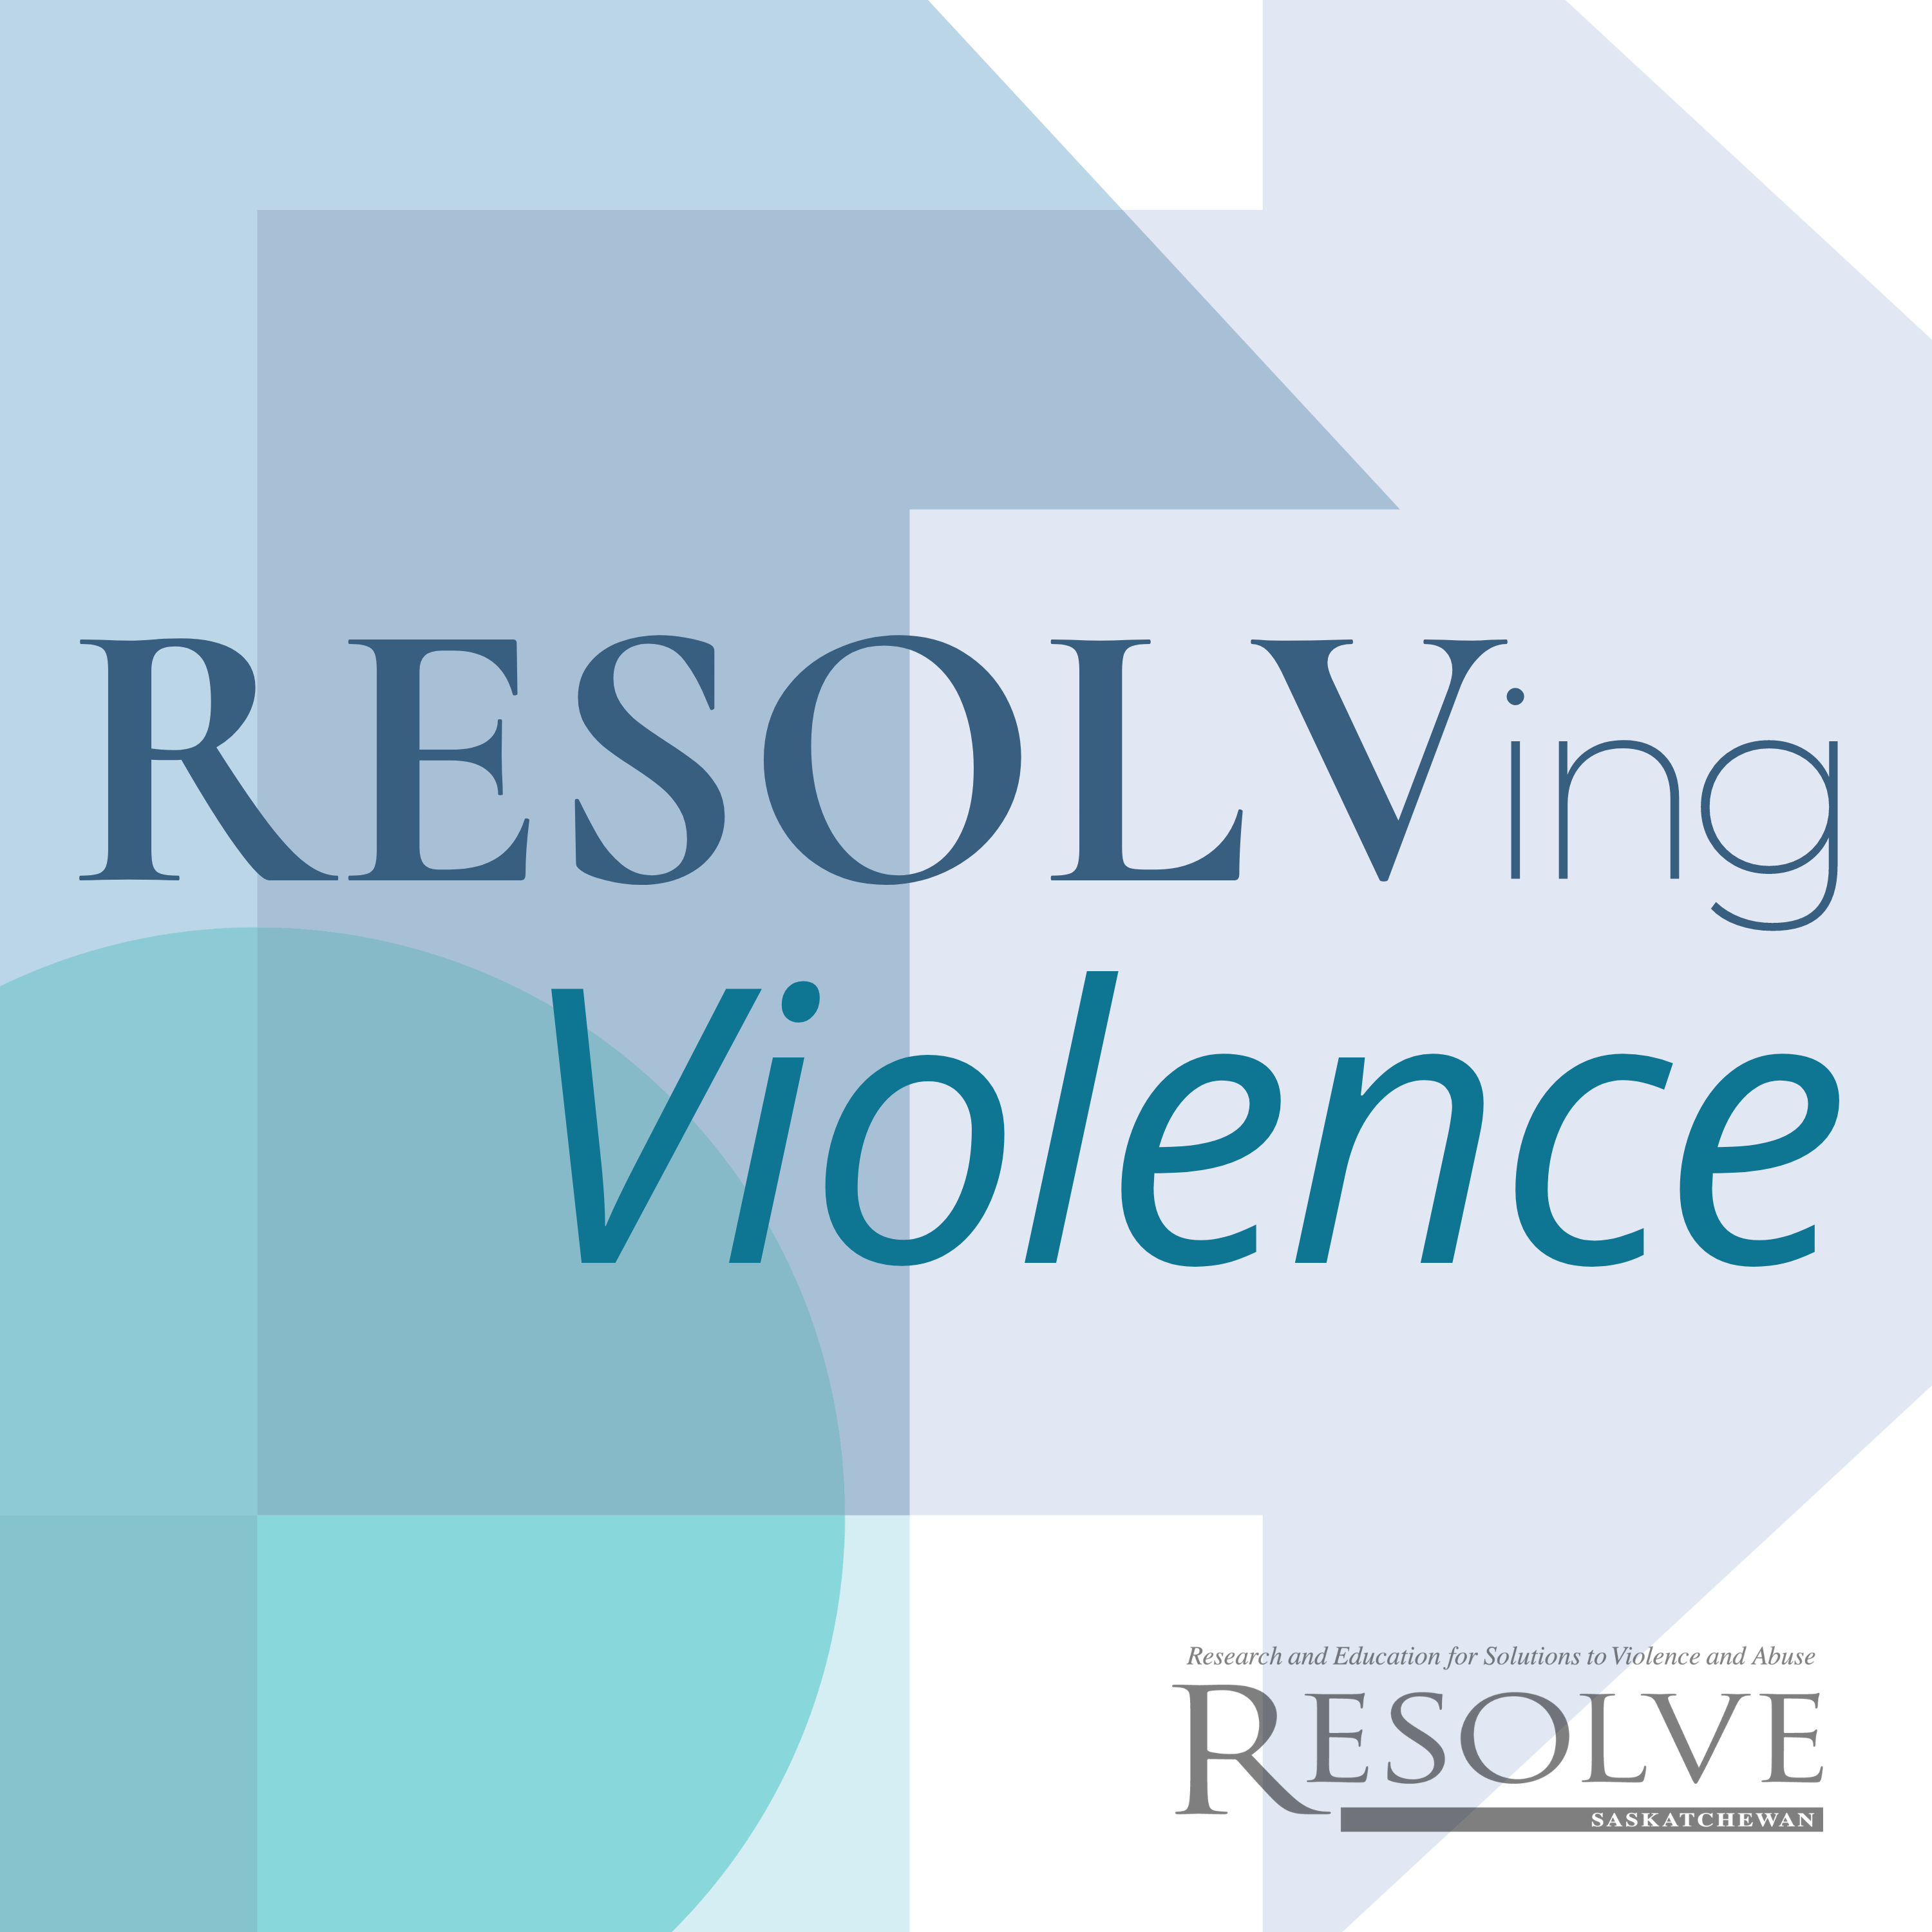 The resolving violence podcast logo, which has the title of the podcast entered in the image, with various shades of blue arrows surrounding.